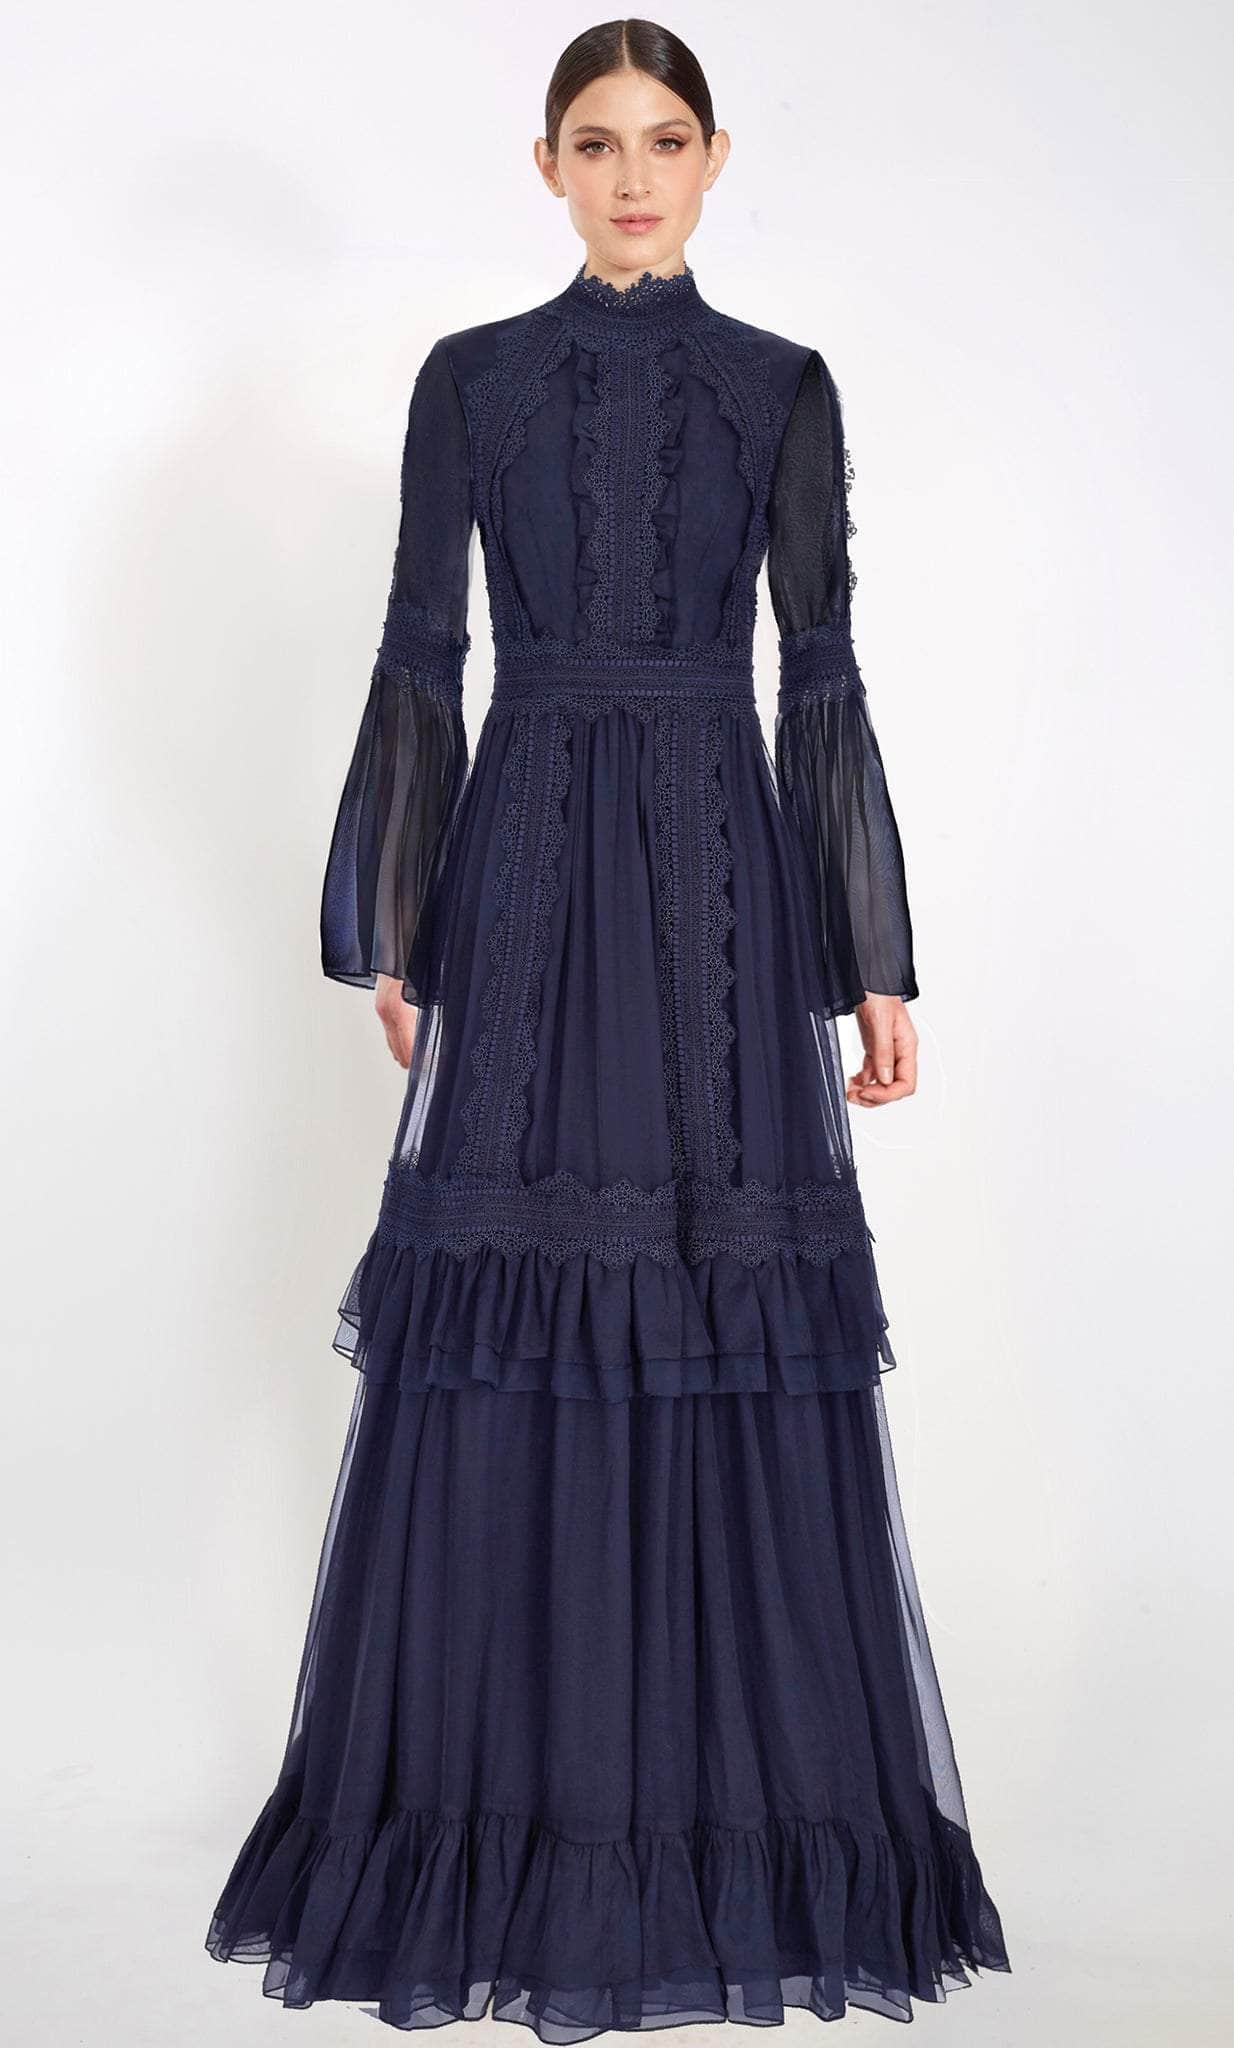 Image of Janique 22102 - Bell Sleeve Lace Evening Gown